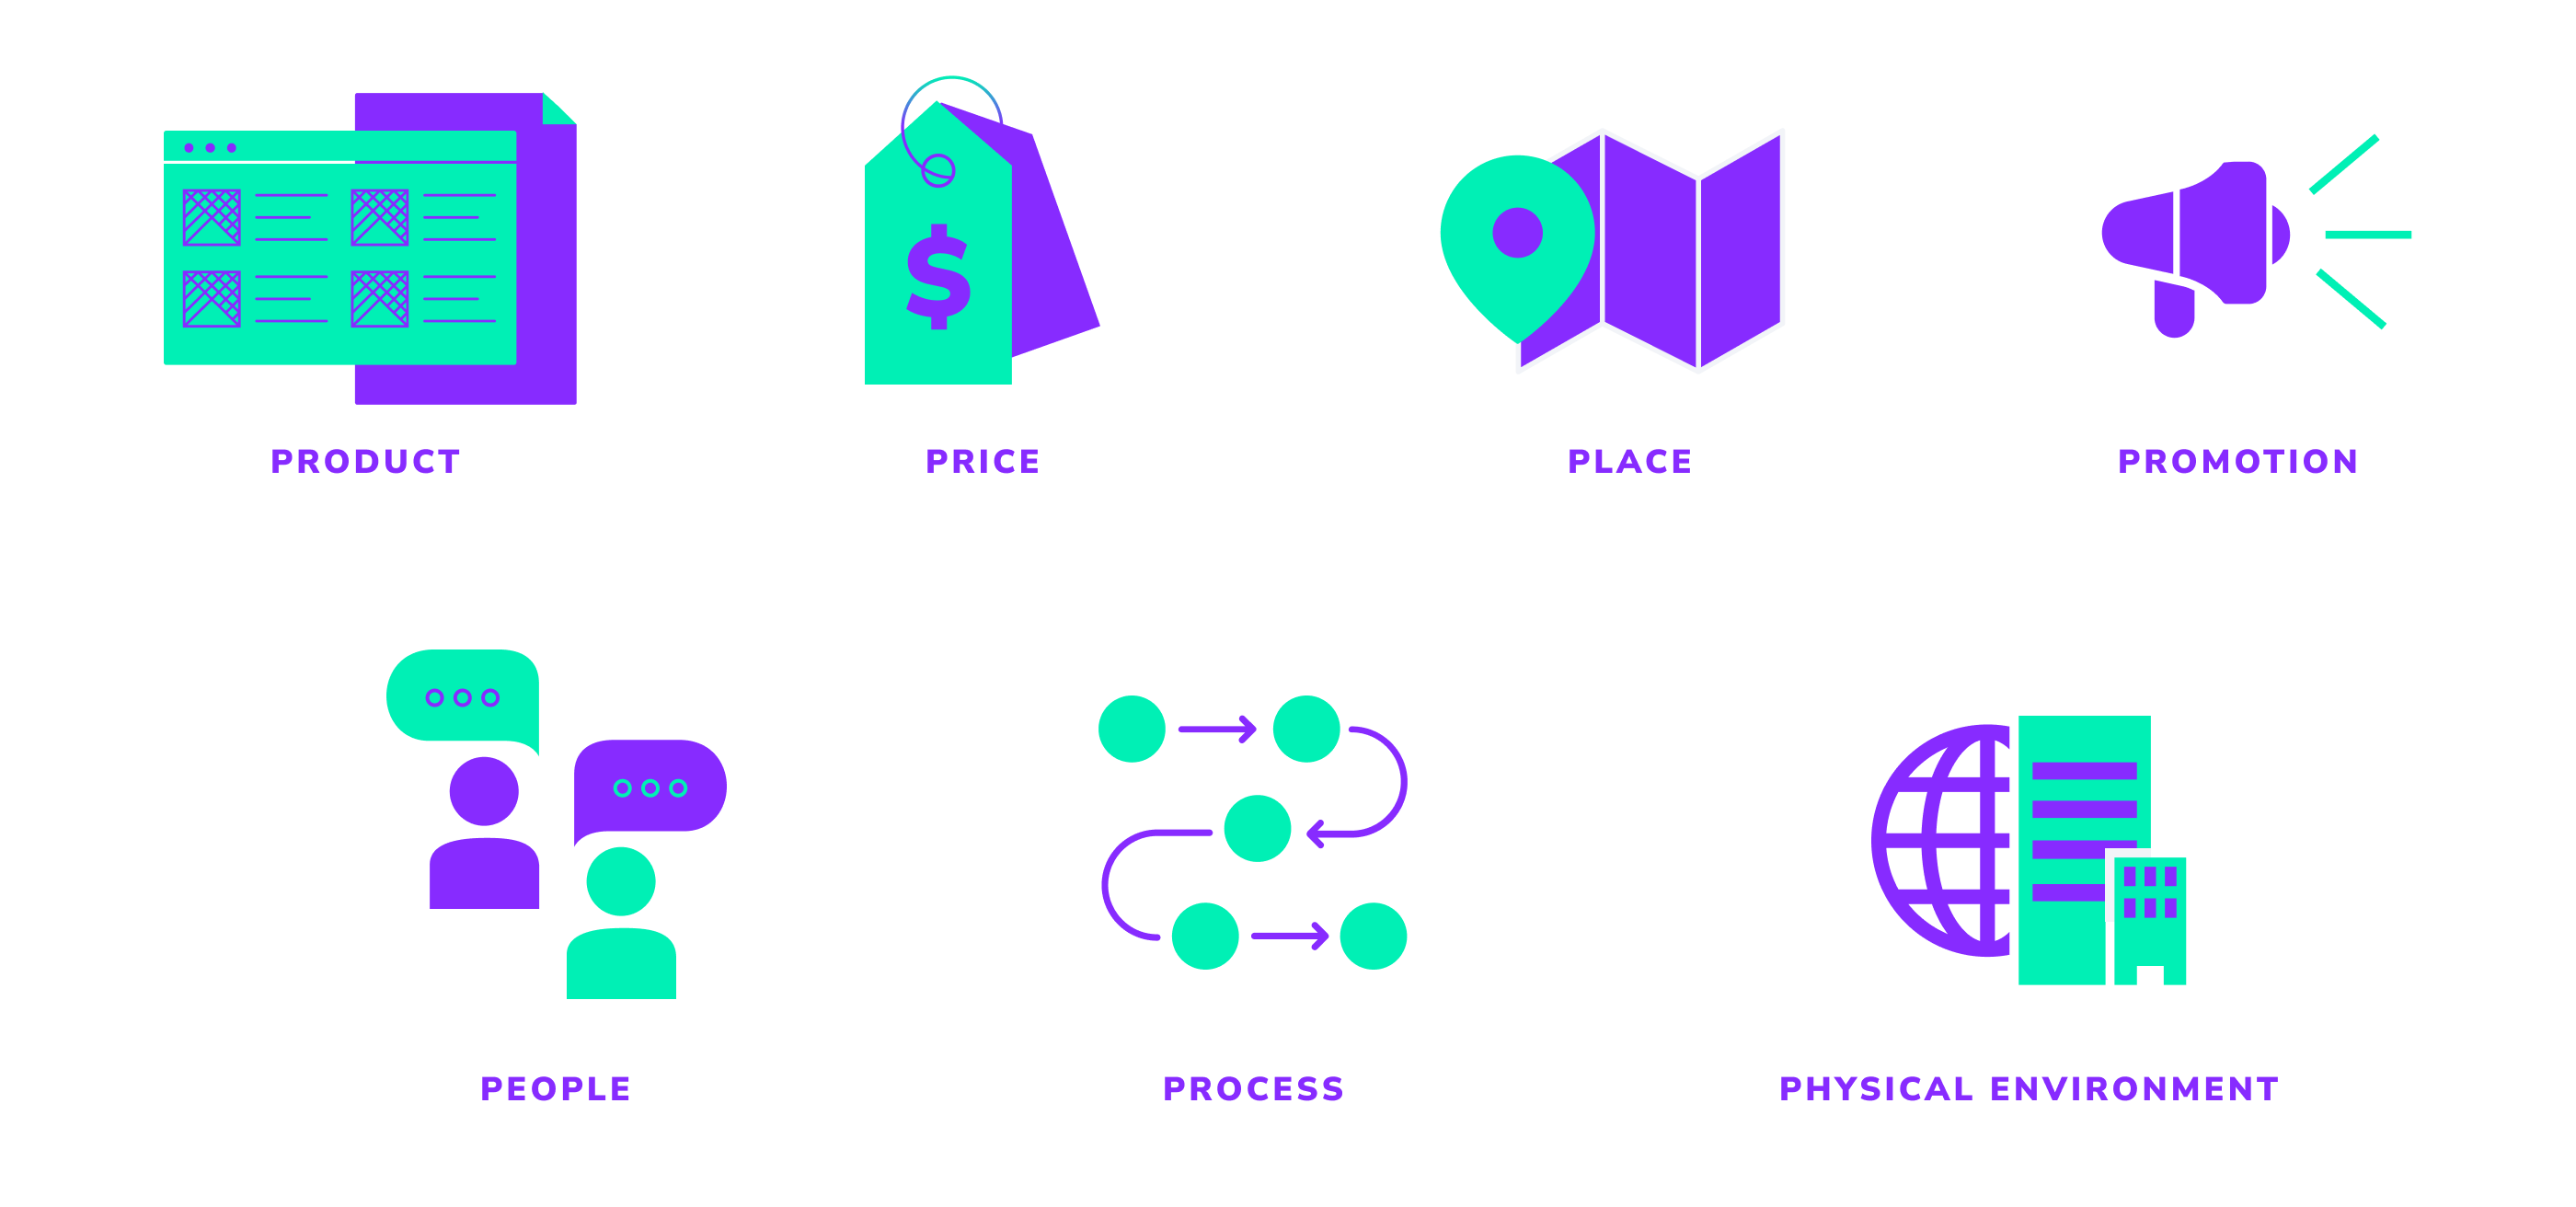 Visual representation of the 7 P's discussed with an icon above each topic: product, price, place, promotion, people, process, and physical environment